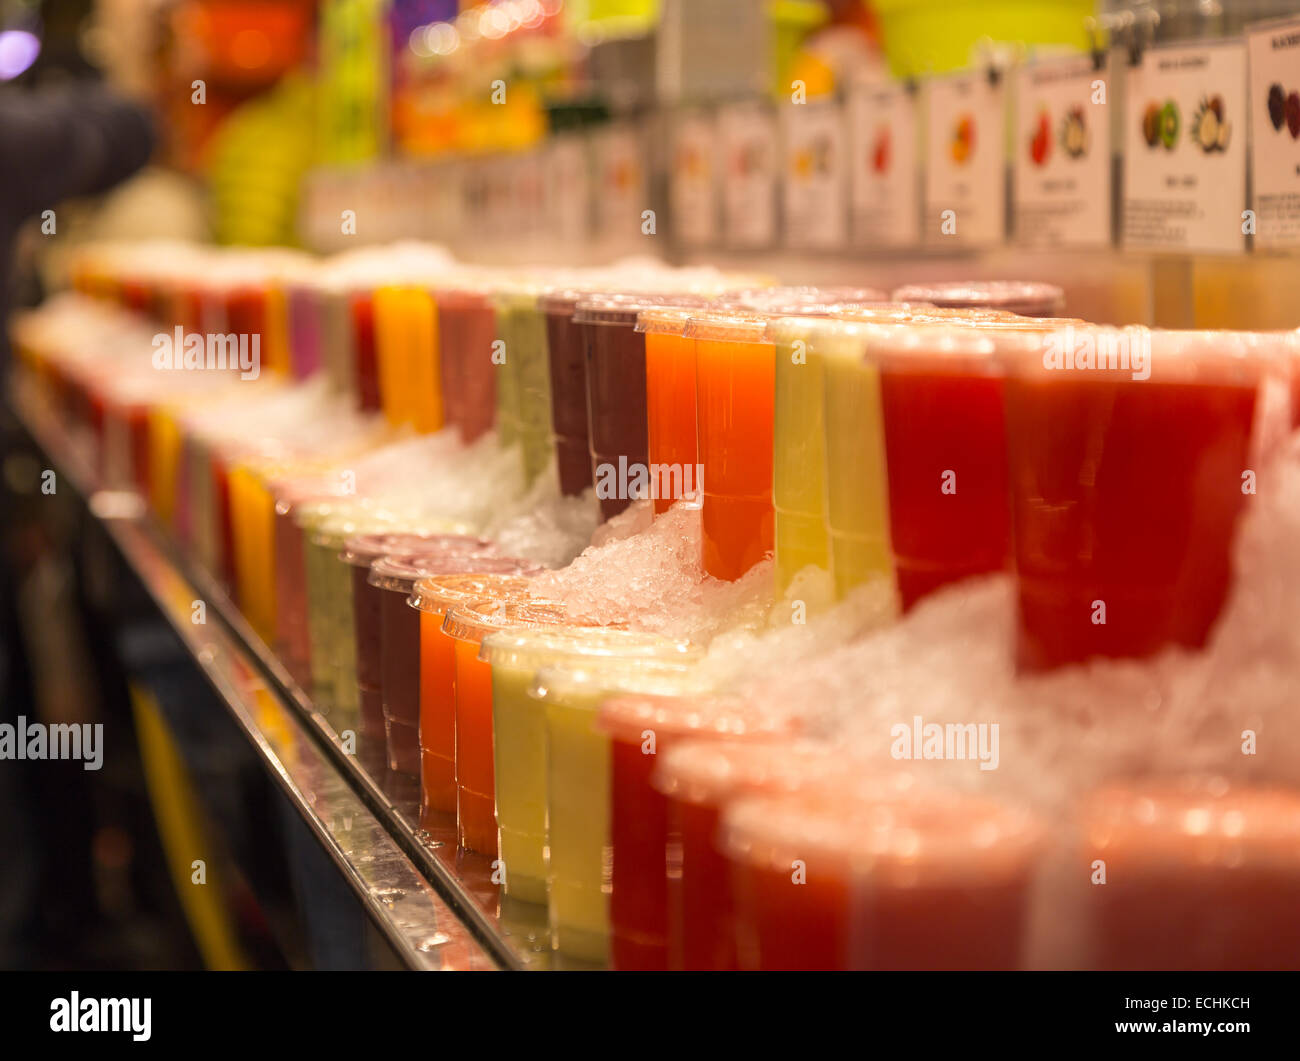 Fresh smoothies at a market stall. Stock Photo